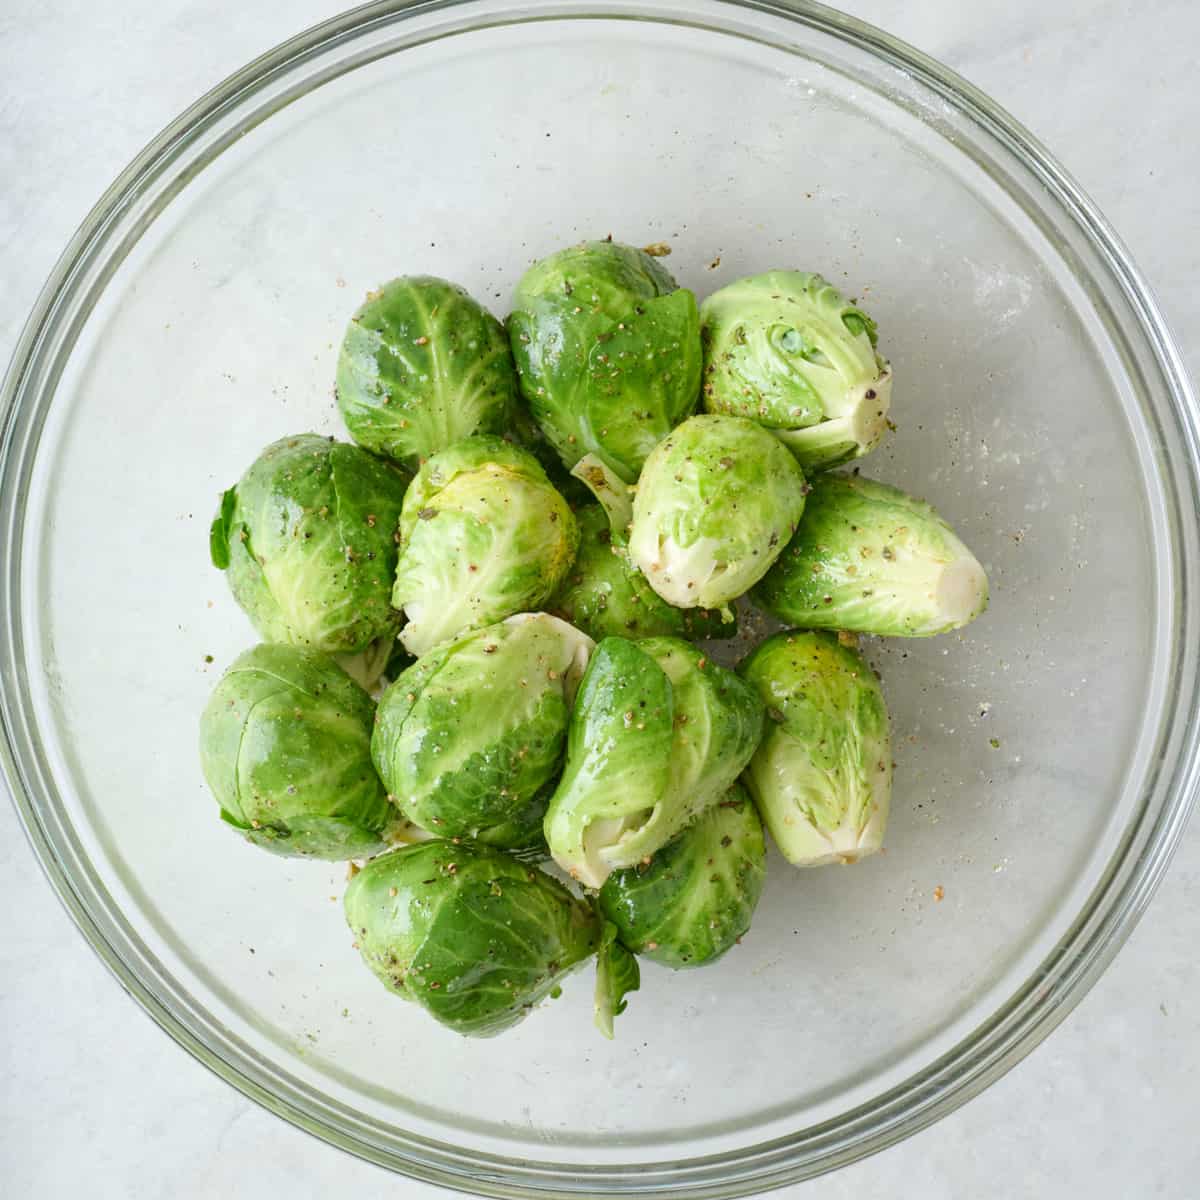 Brussel sprouts in a bowl with oil and spices.